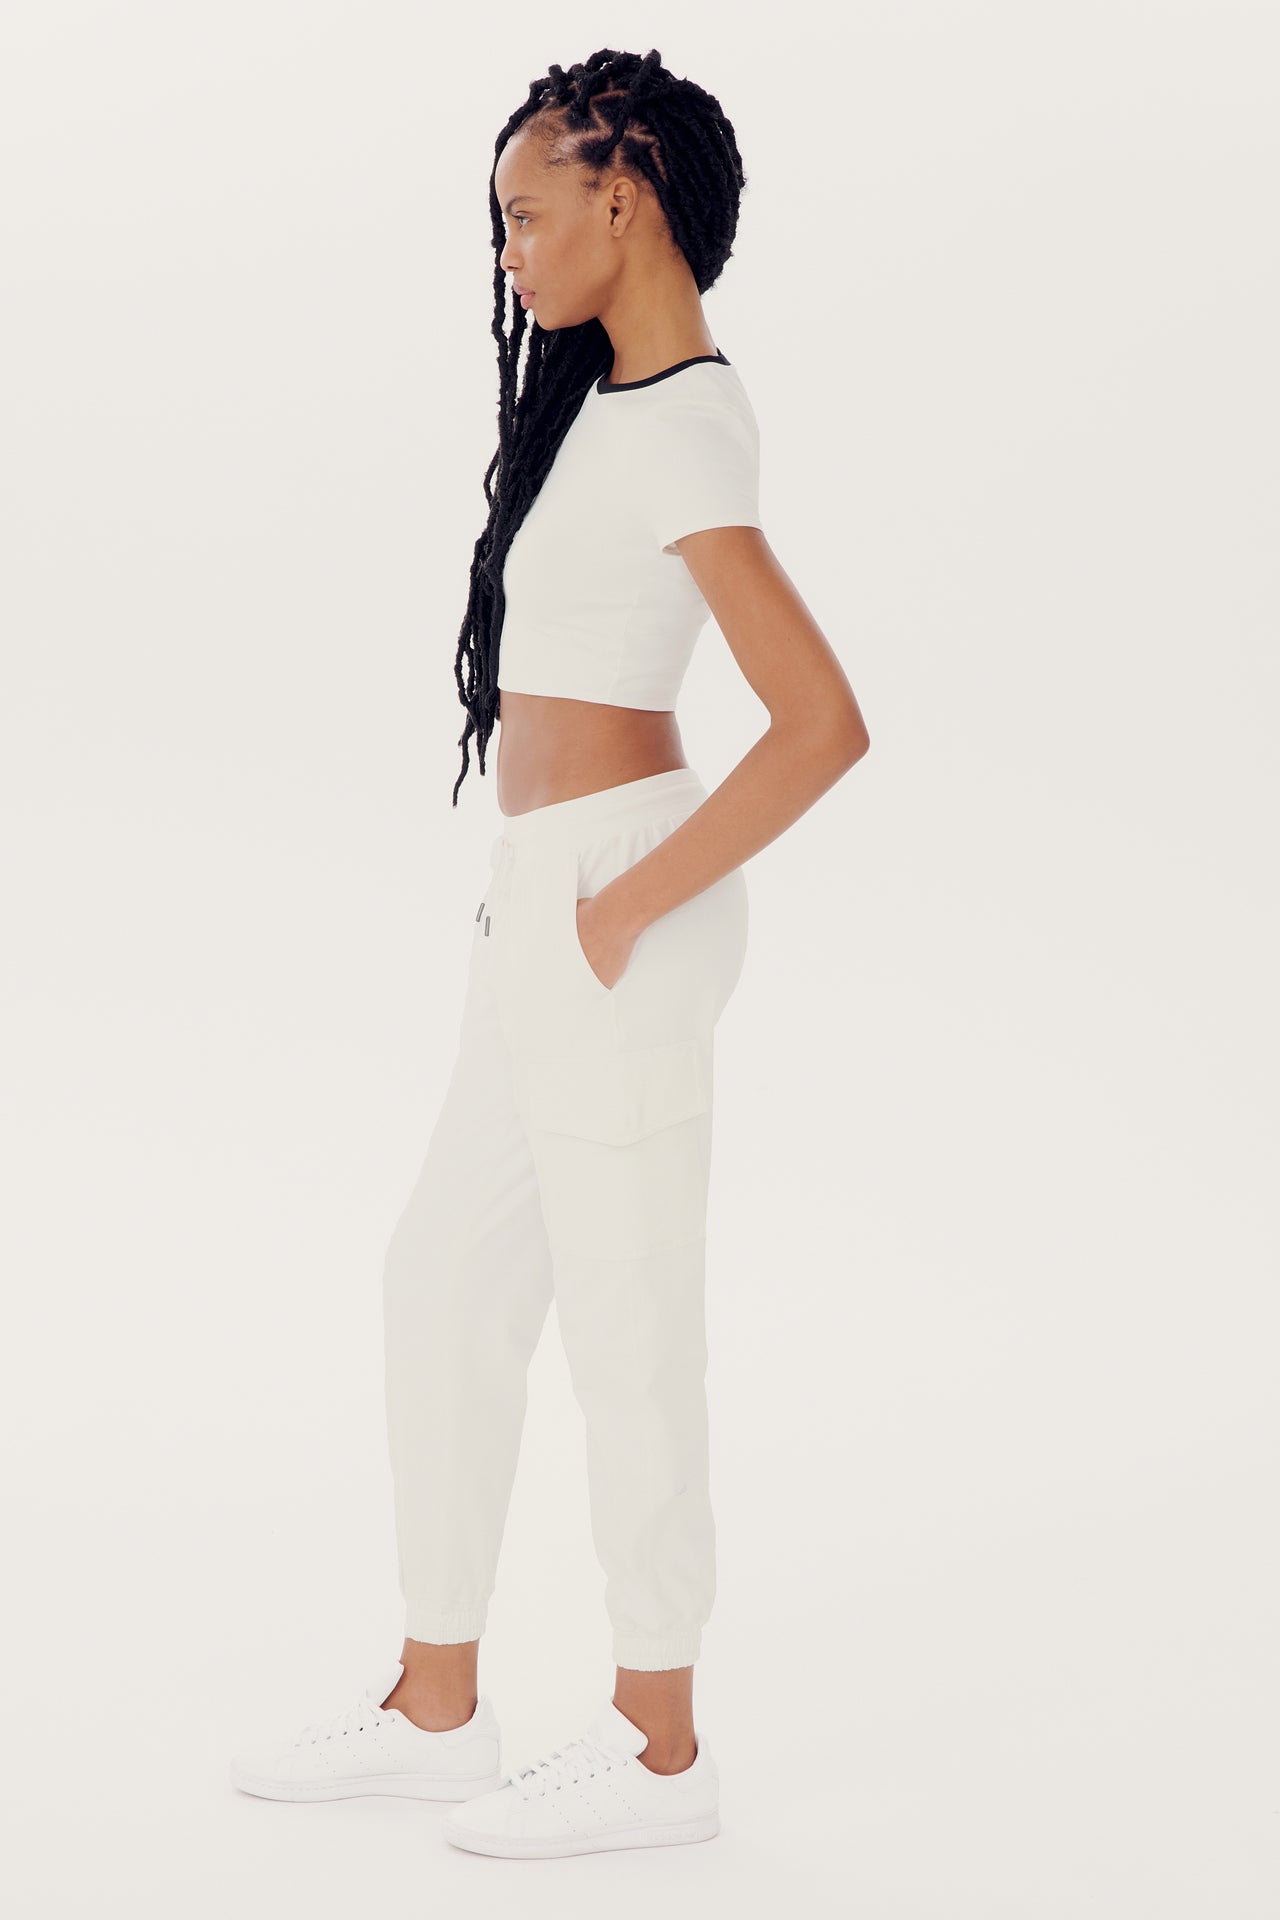 A person with braided hair is wearing a white crop top, Supplex Cargo Pant - White by SPLITS59, and white sneakers, standing in a side profile view against a plain white background.